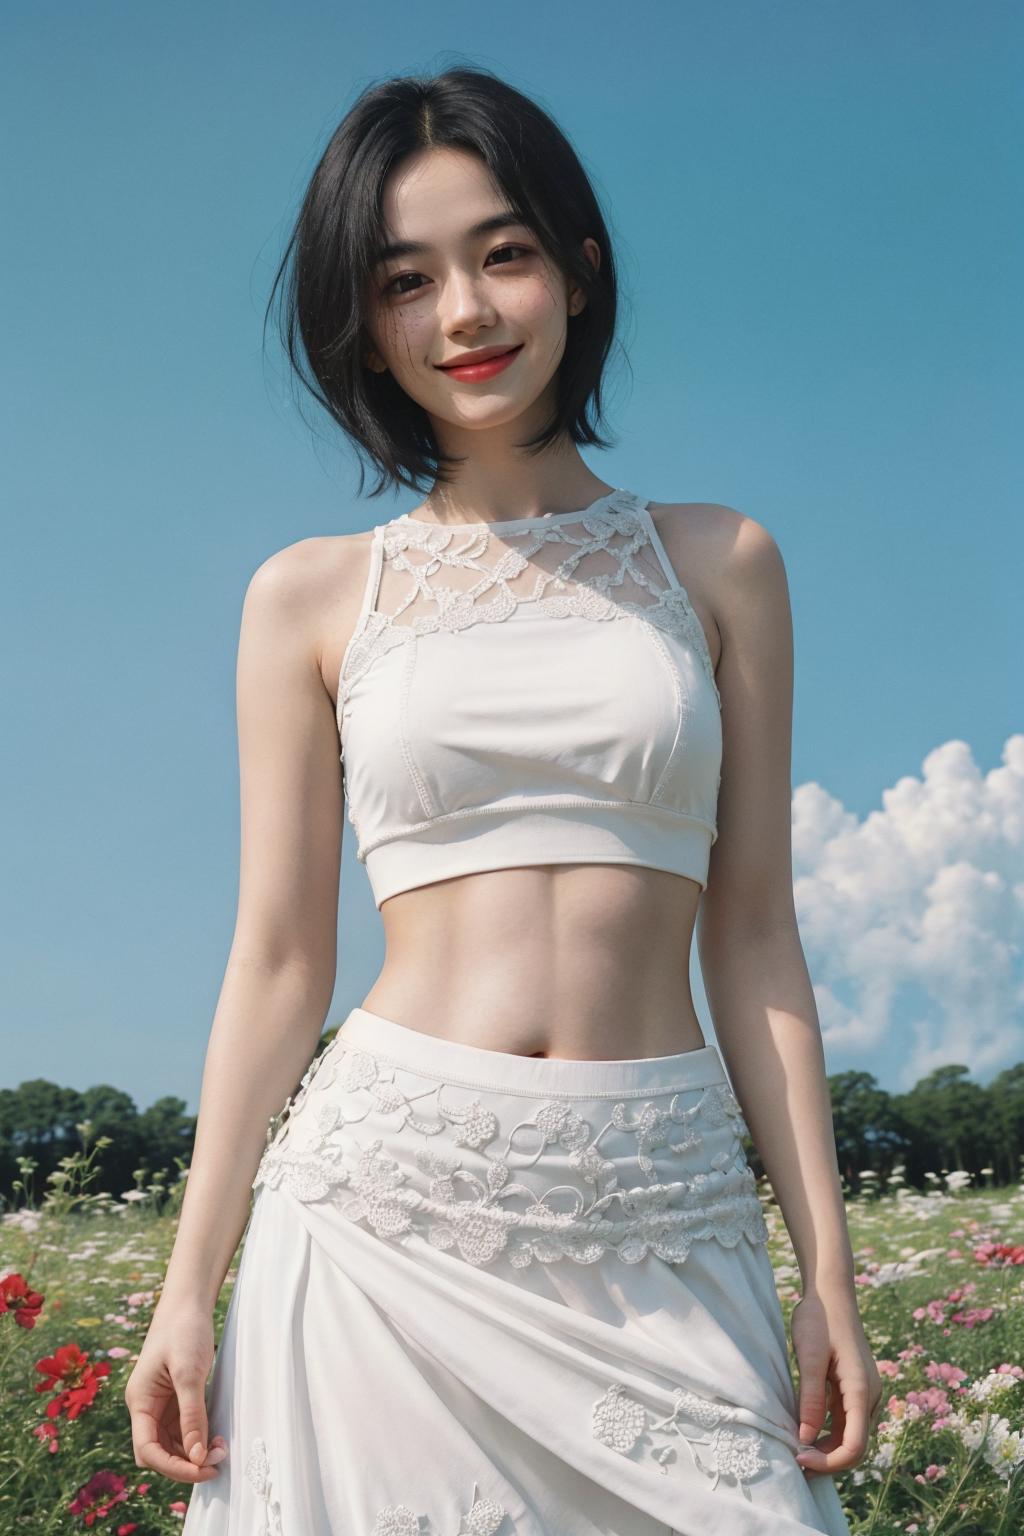 A young woman wearing a white tank top and white skirt standing in a field of flowers.